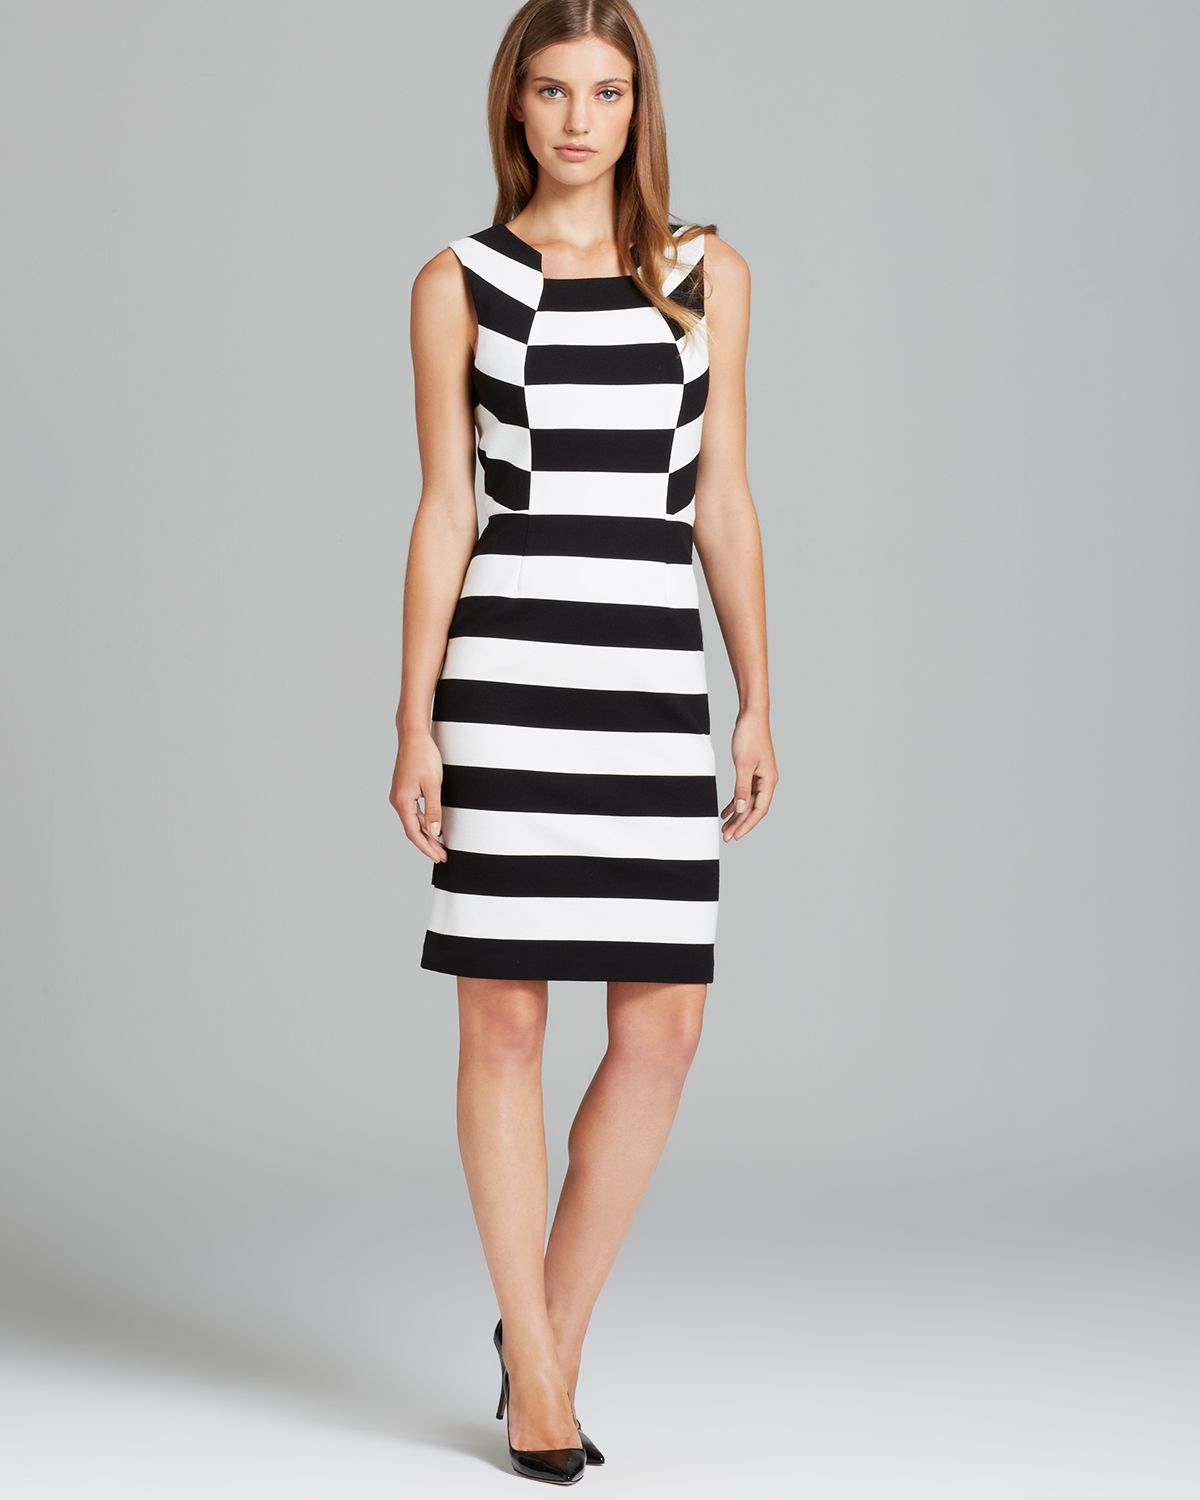 trina turk dresses lord and taylor